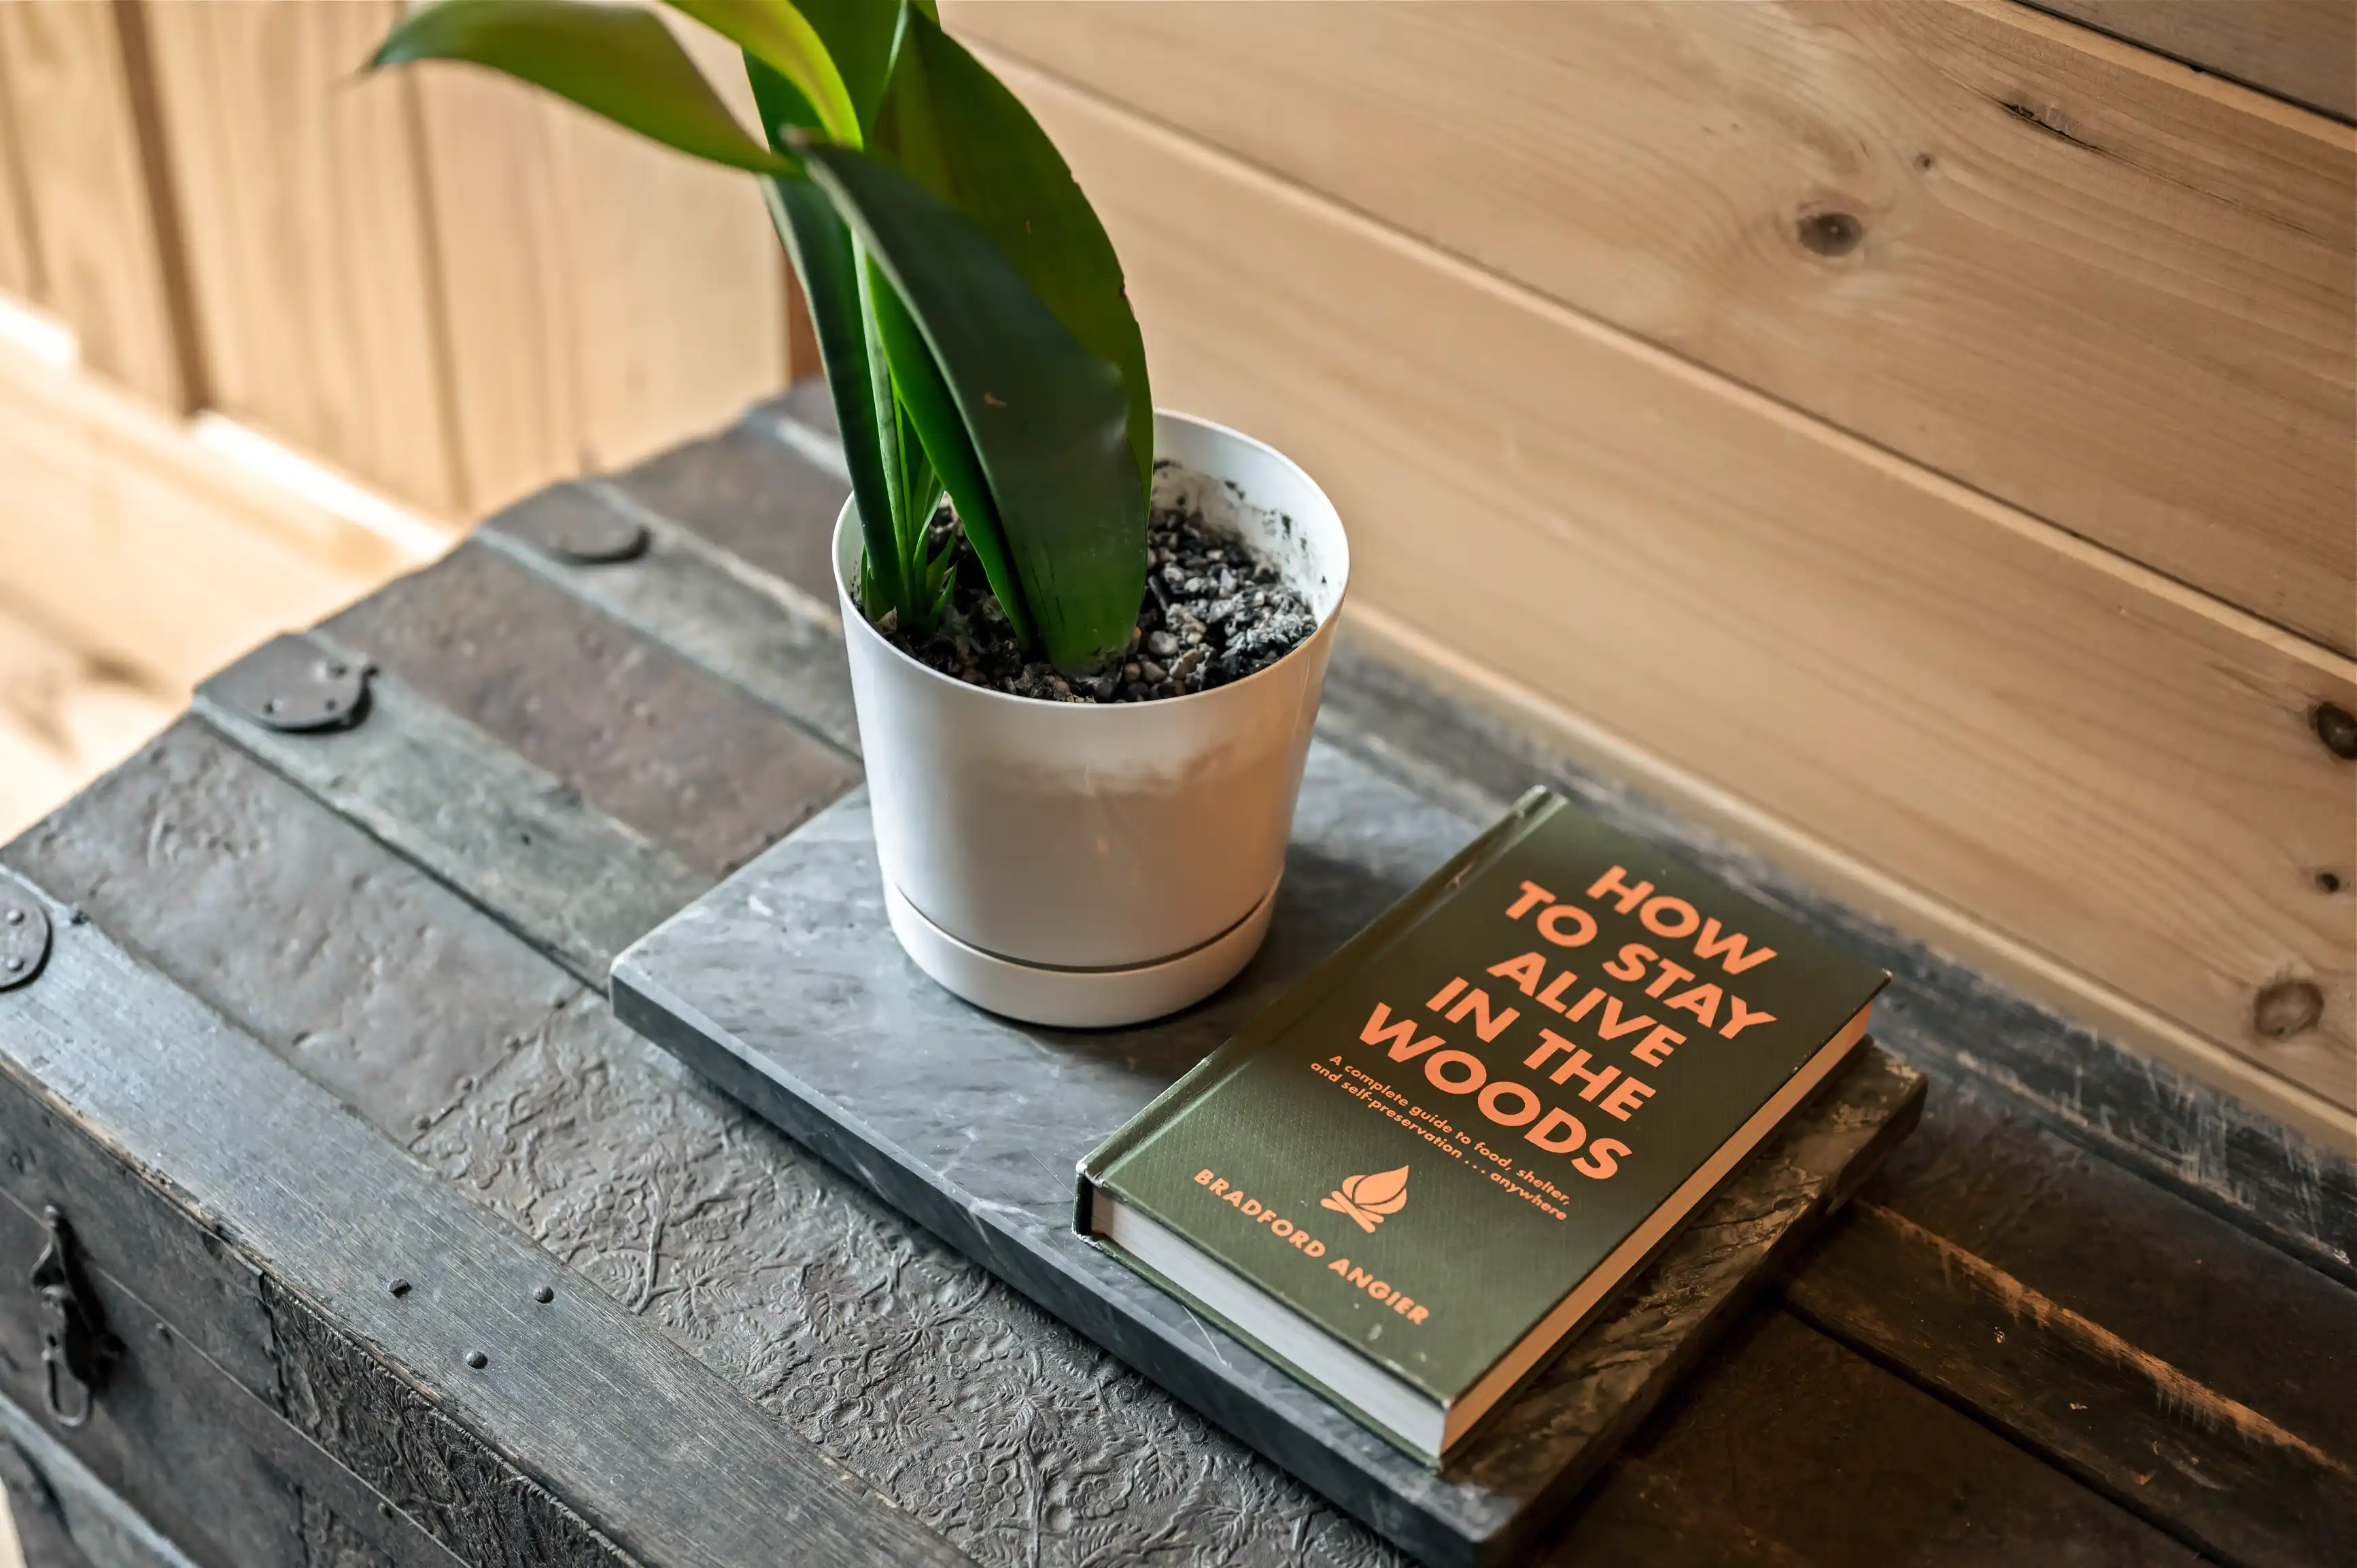 A green houseplant in a white pot sitting on a wooden table next to a book titled "How to Stay Alive in the Woods" by Bradford Angier.